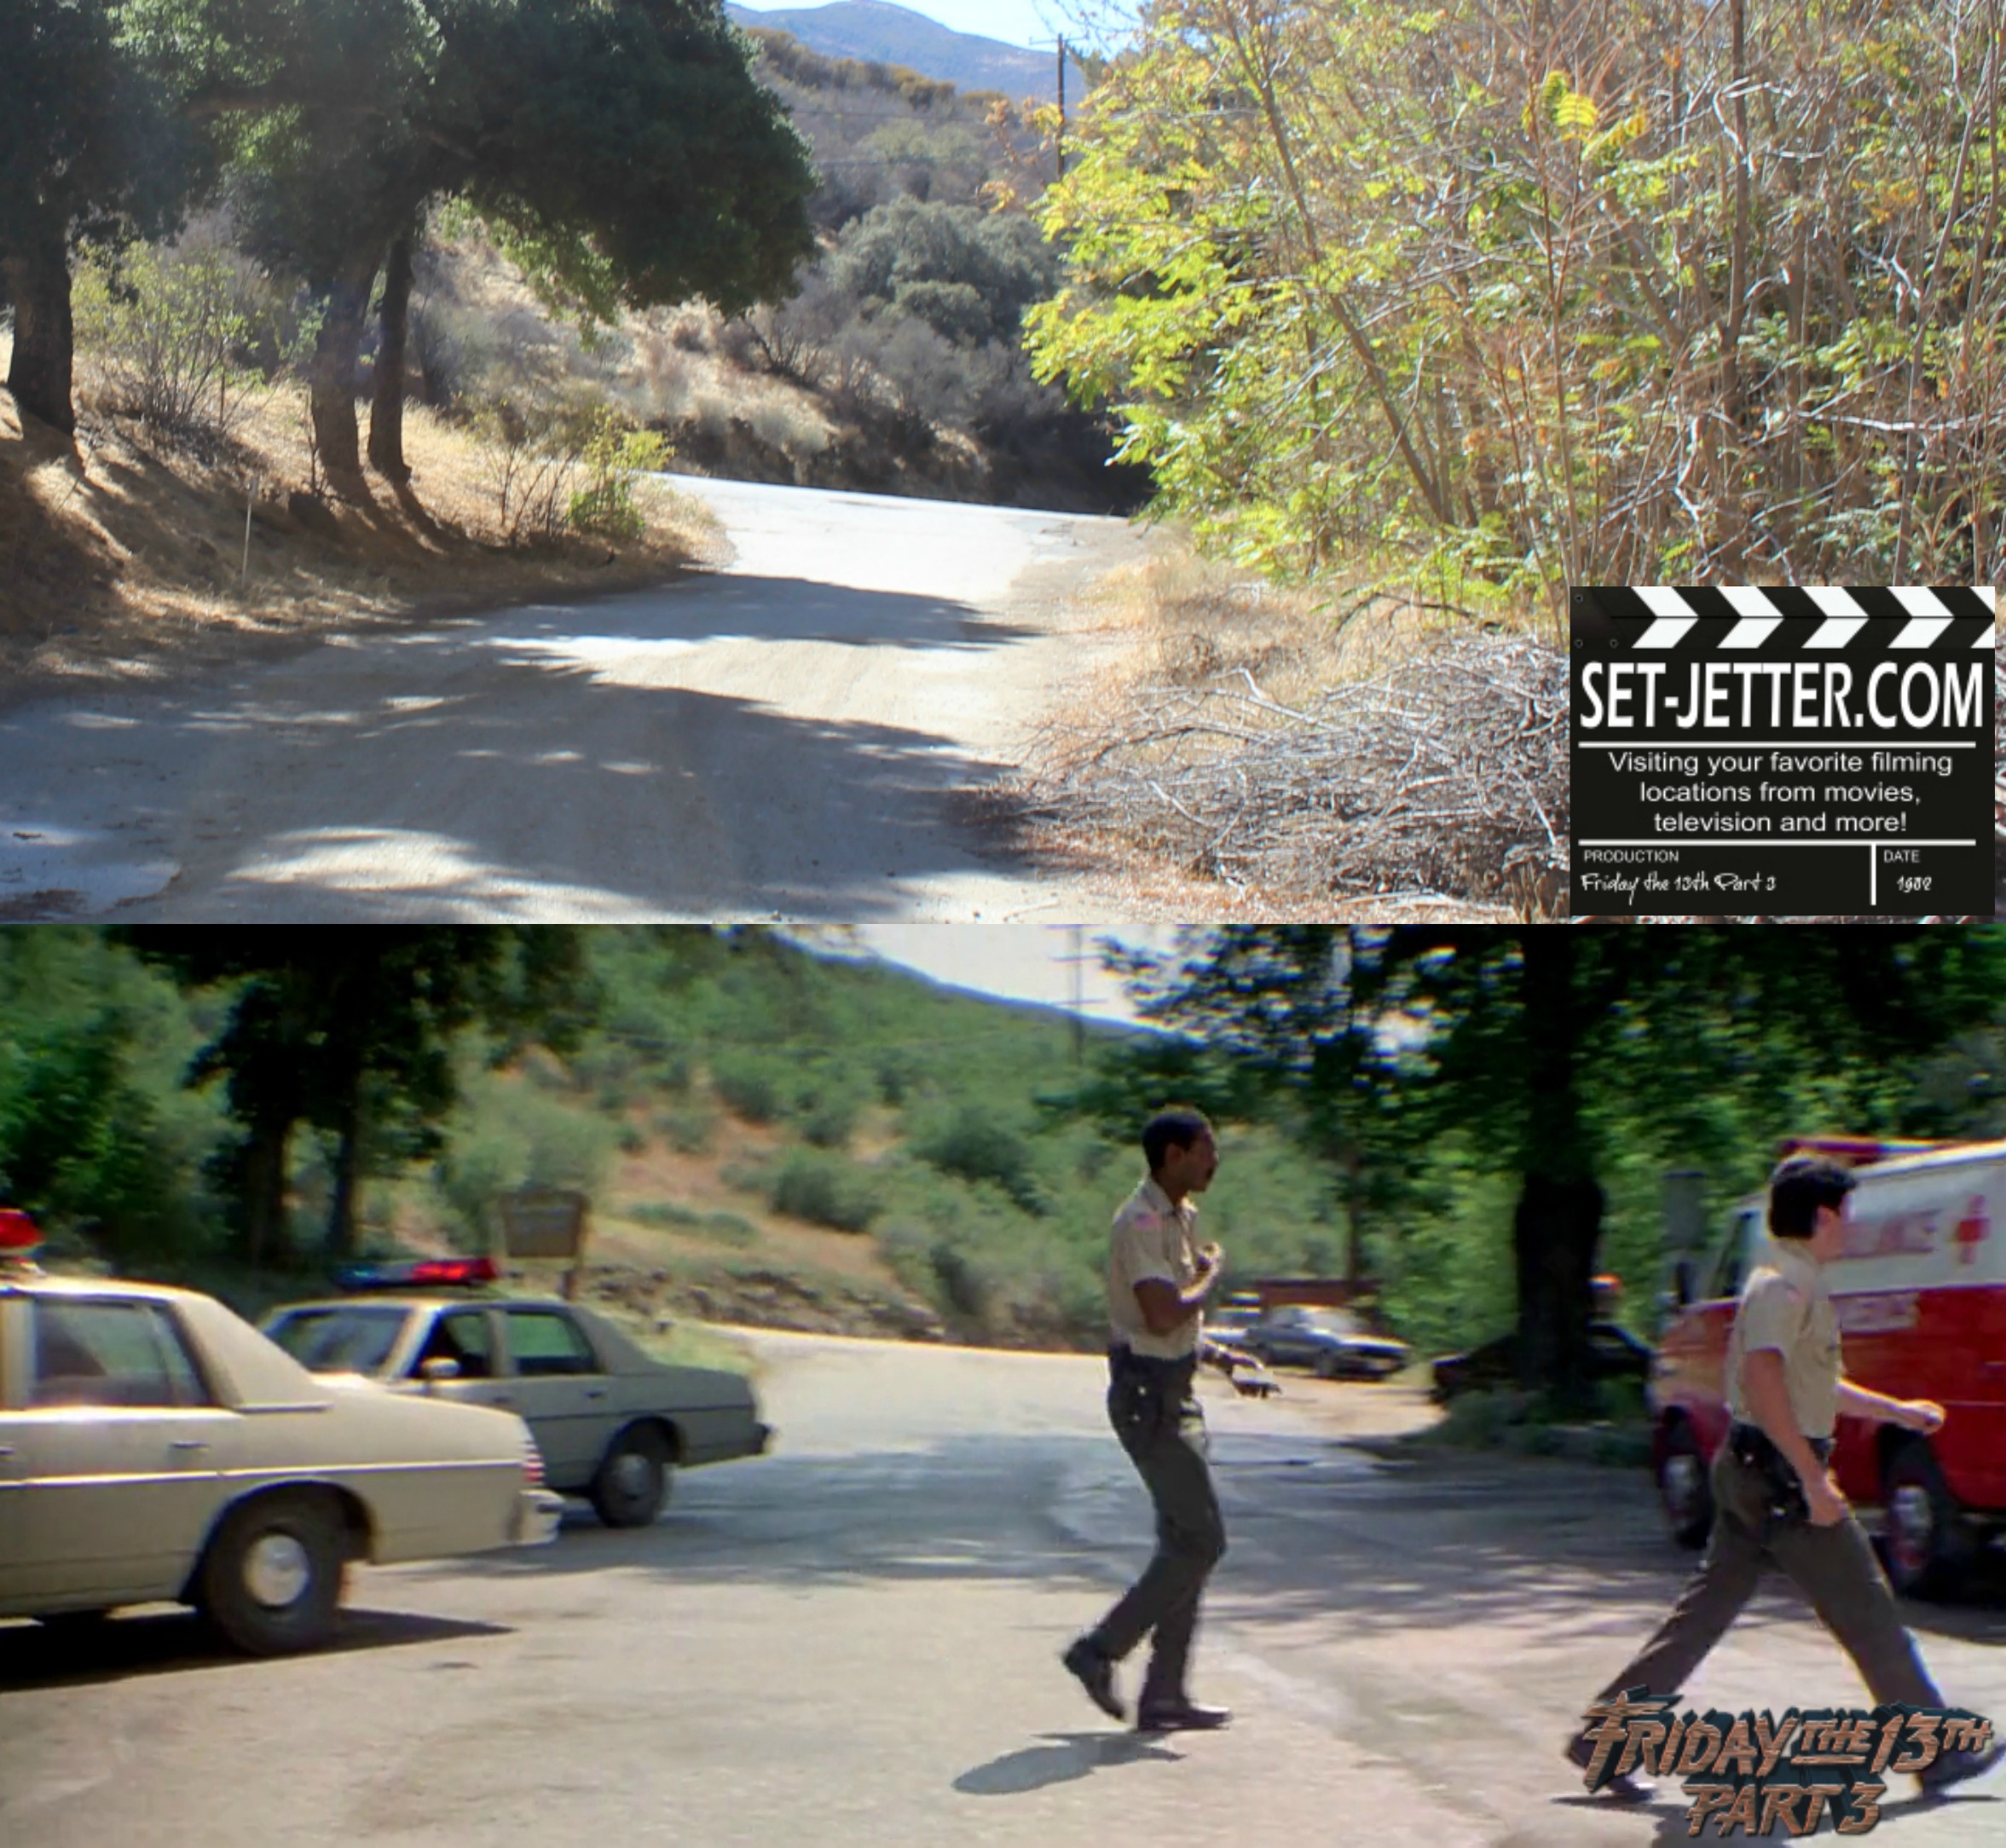 Friday the 13th Part 3 comparison 218.jpg